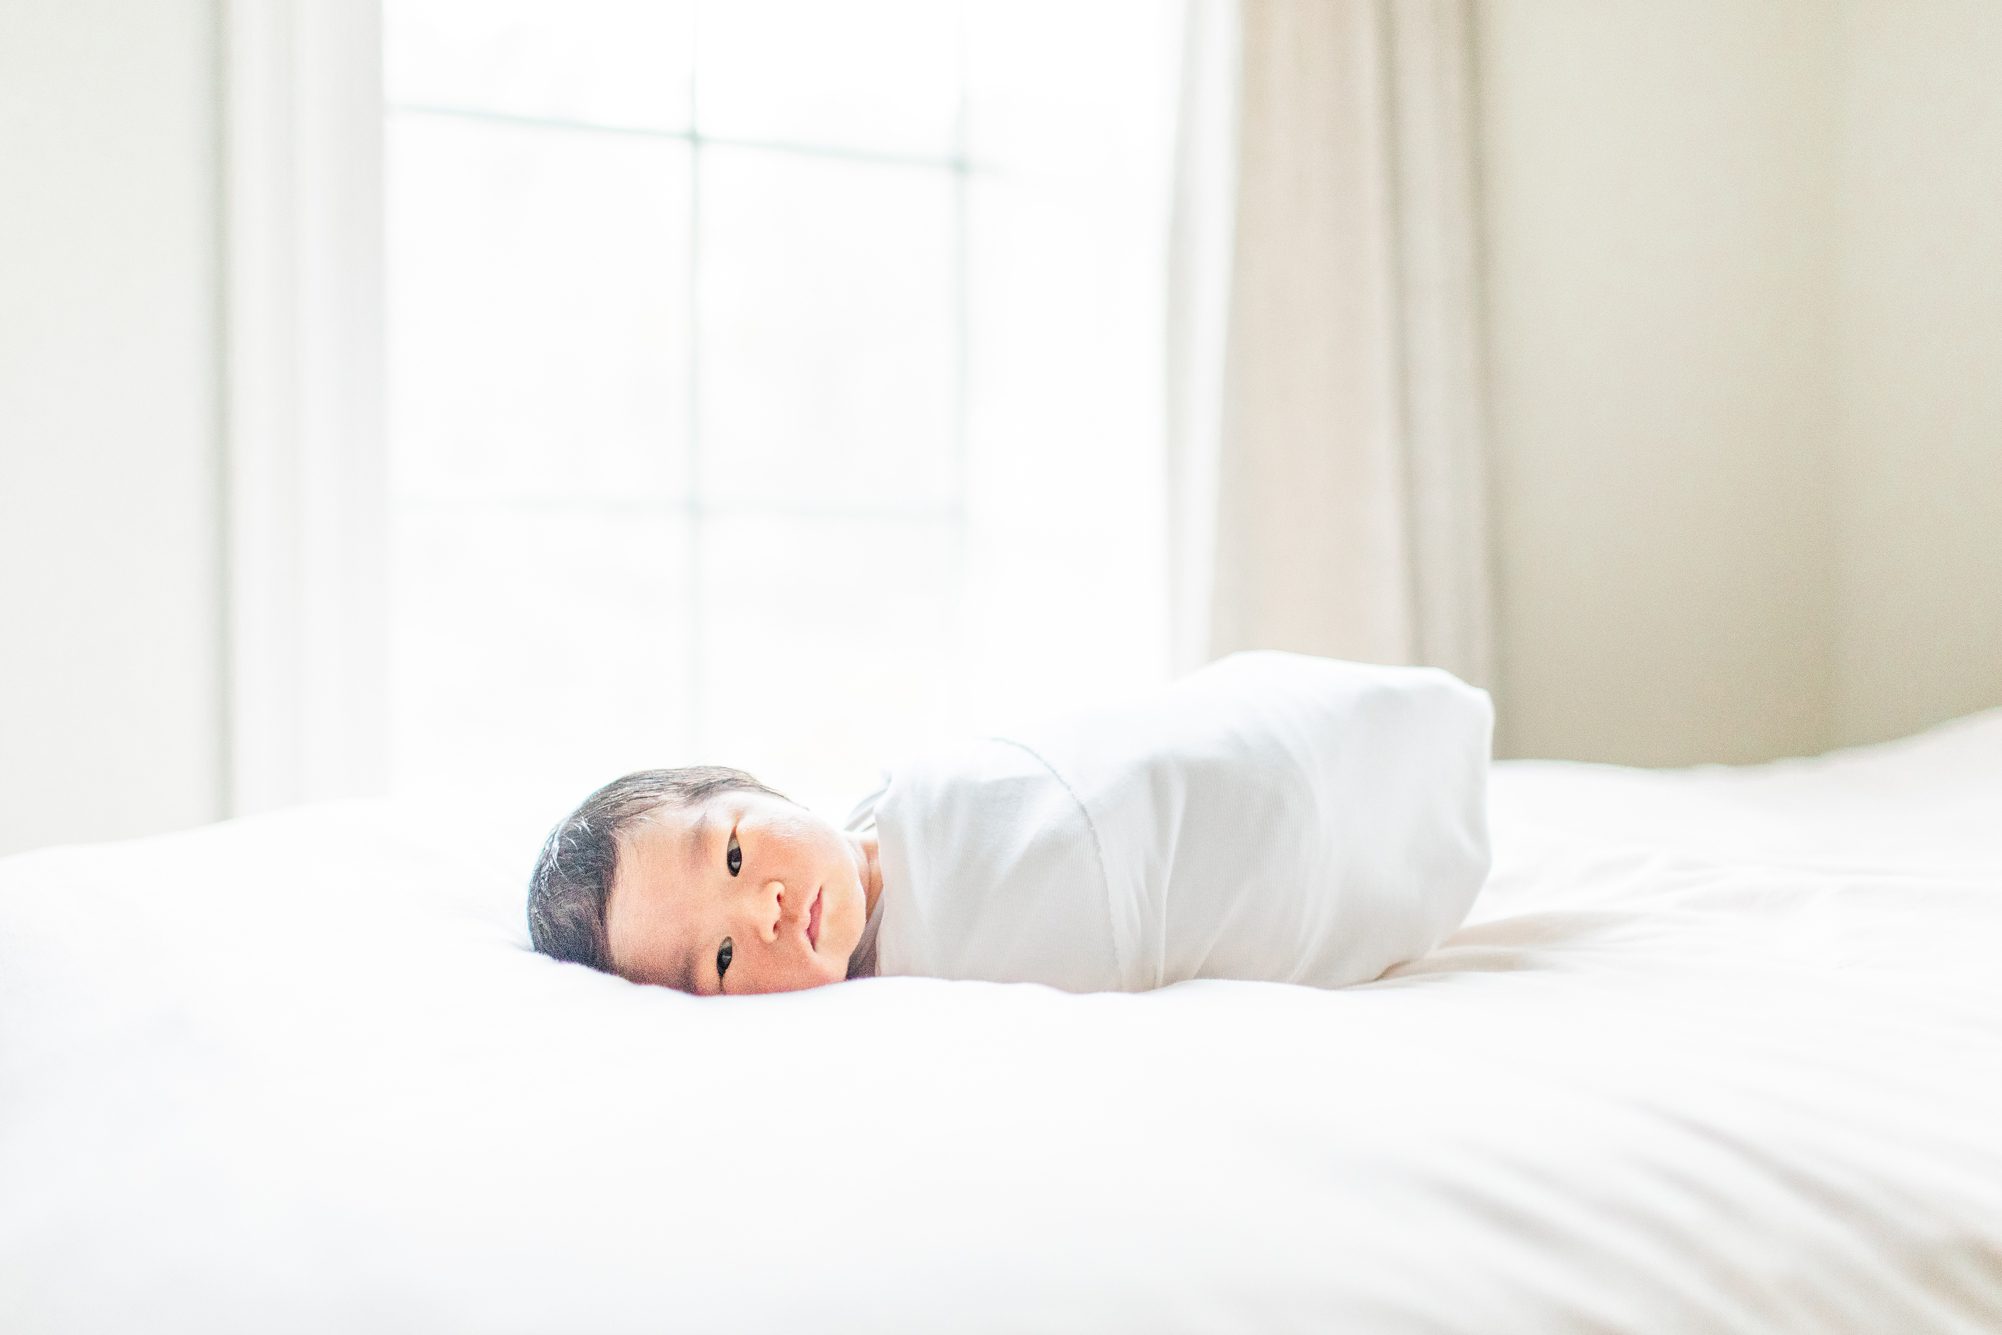 Baby in white swaddle on bed during in-home newborn session. Photo by LRG Portraits.